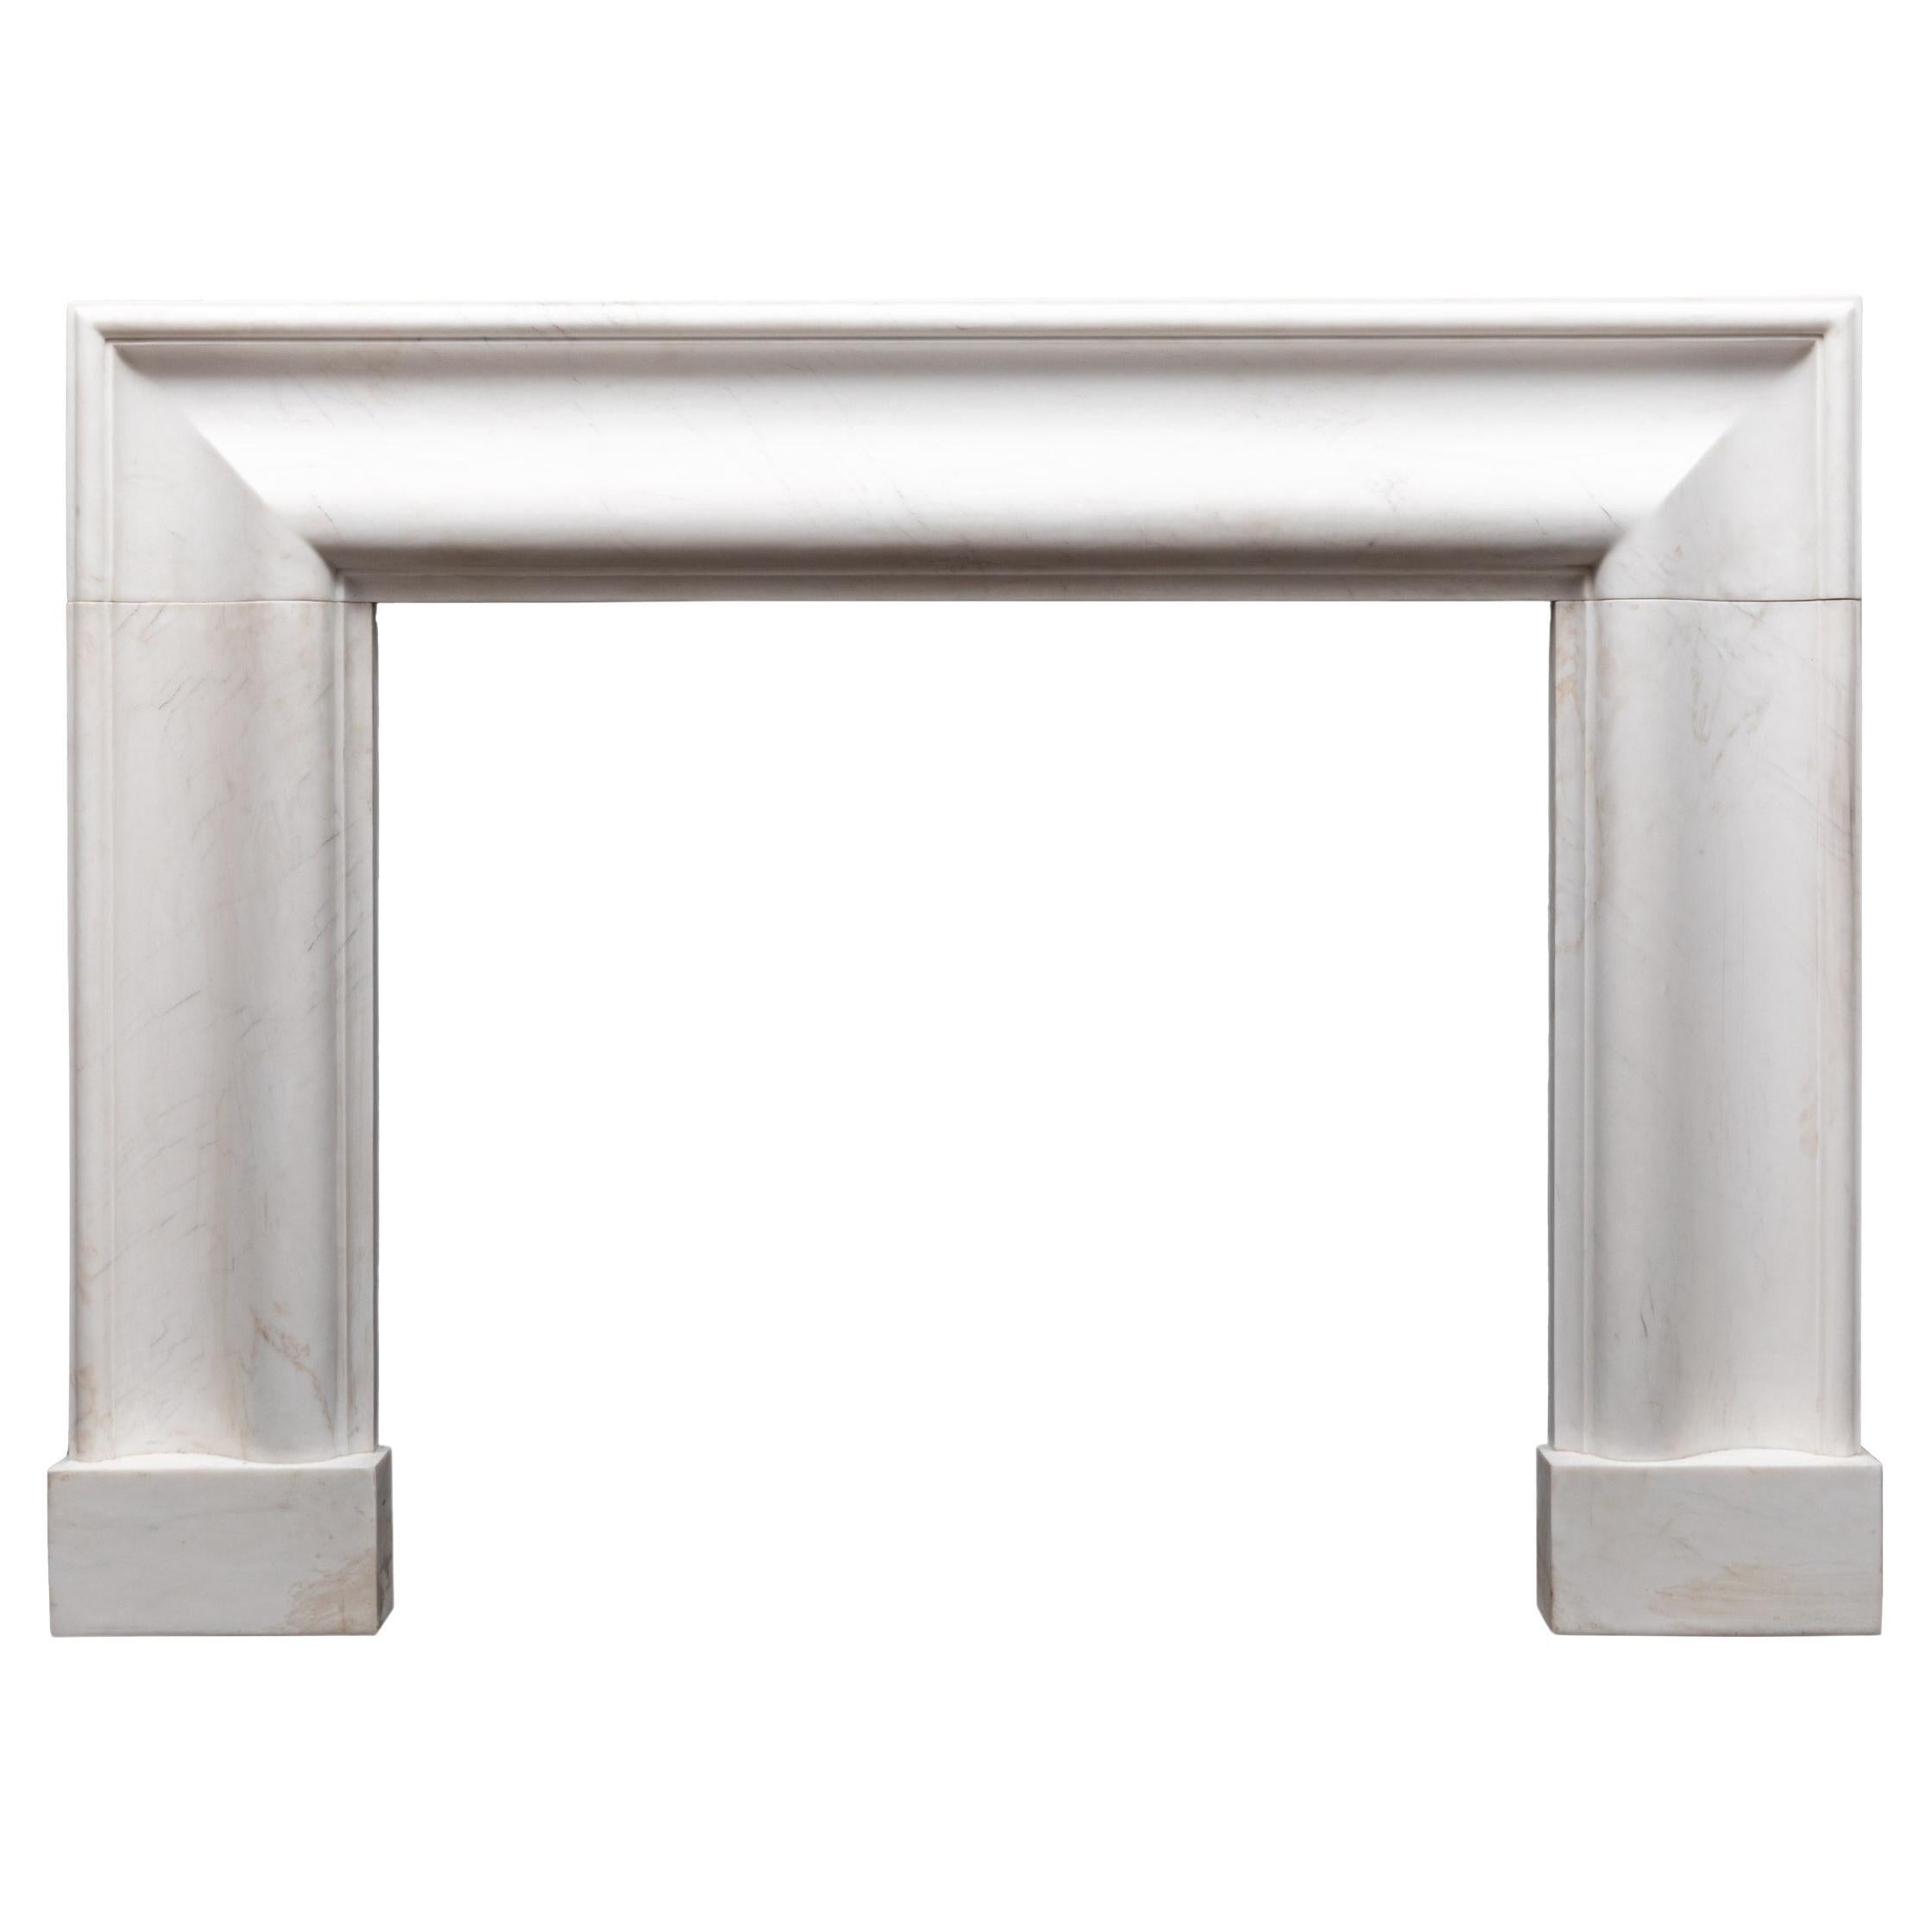 Ryan & Smith Large White Marble Bolection Fireplace Mantel For Sale